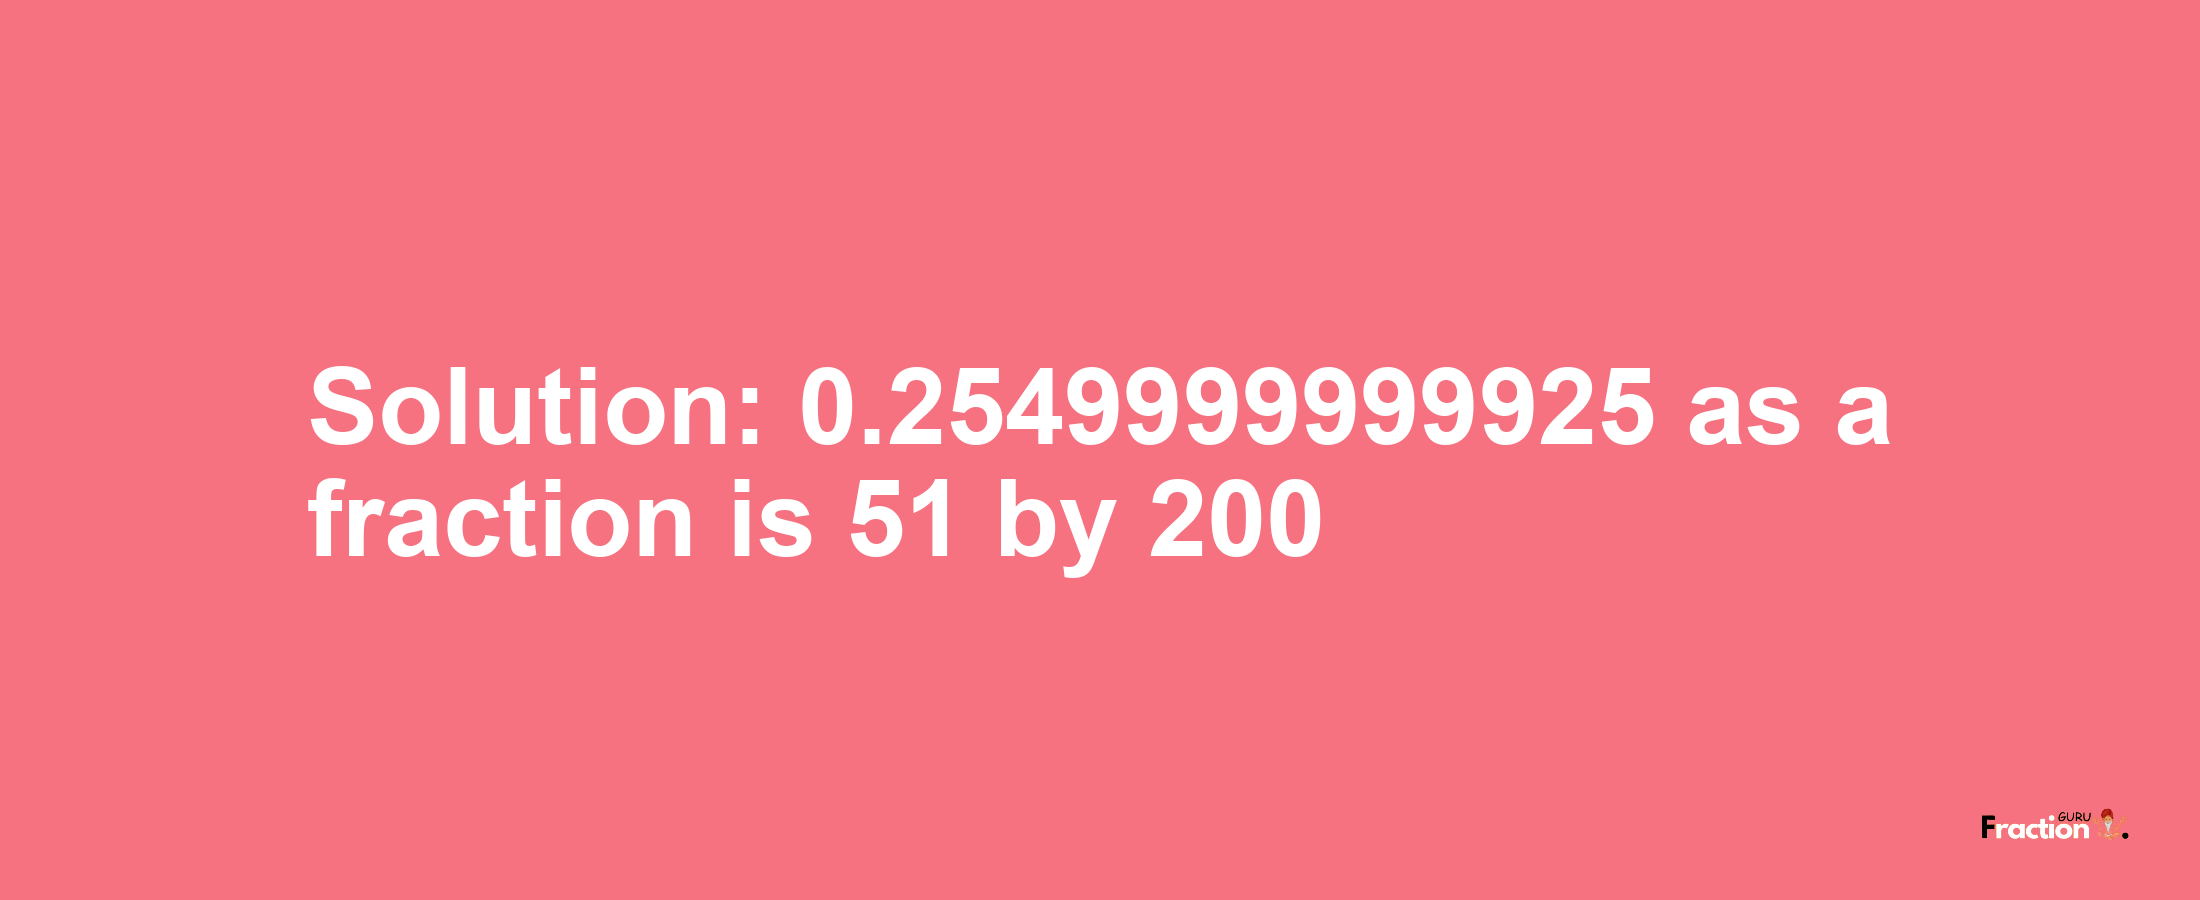 Solution:0.2549999999925 as a fraction is 51/200